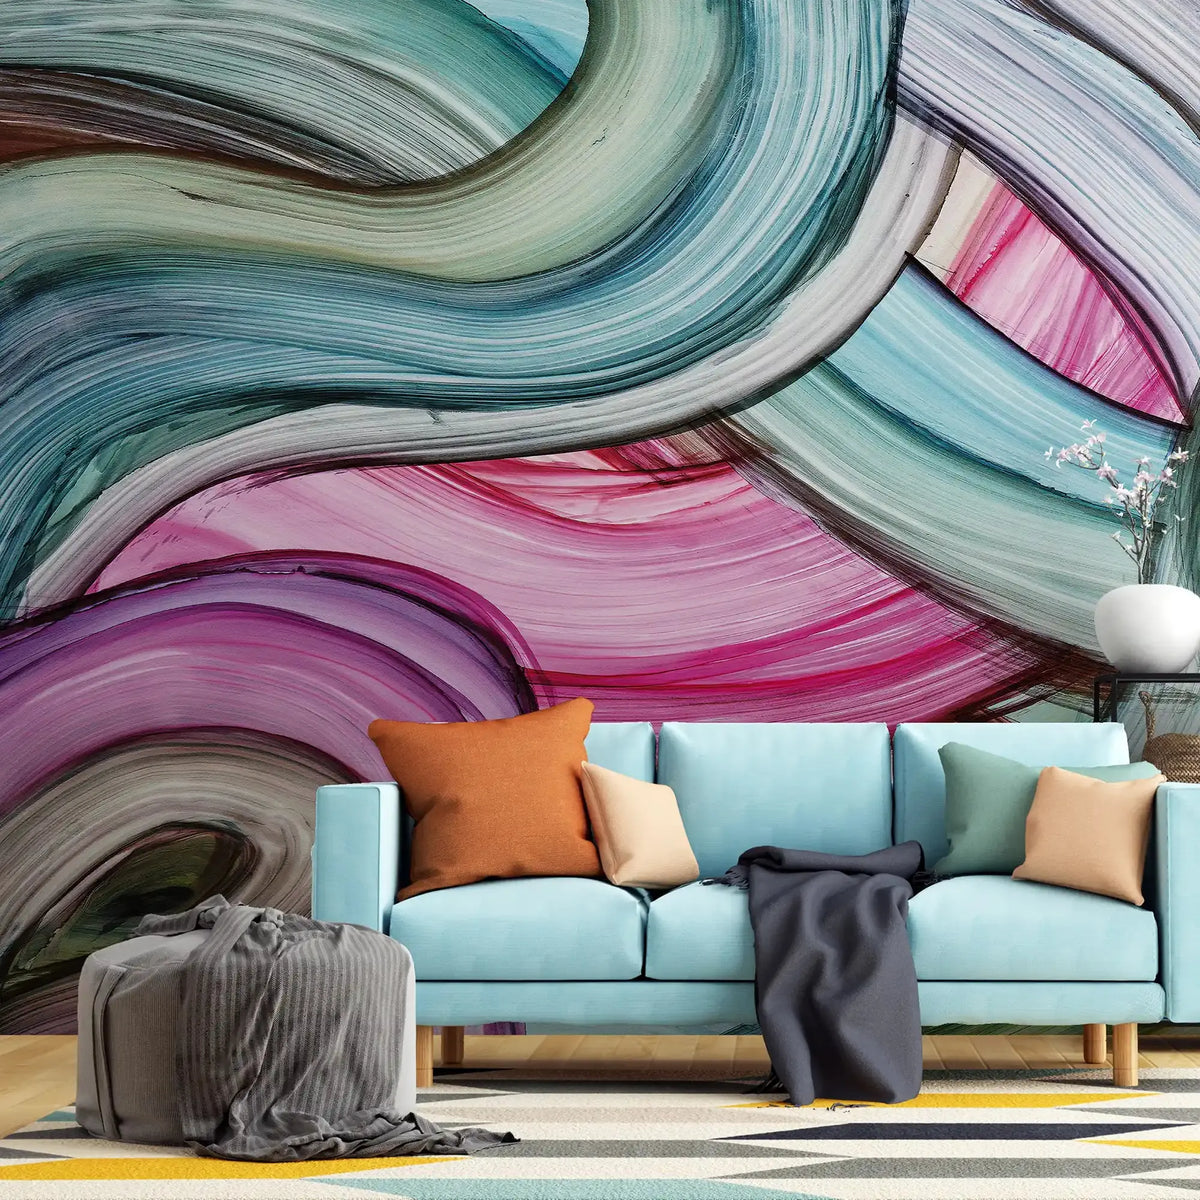 3092-D / Peelable Stickable Wallpaper with Colorful Wavy Lines - Bold, Contemporary Geometric Design for Any Room - Artevella